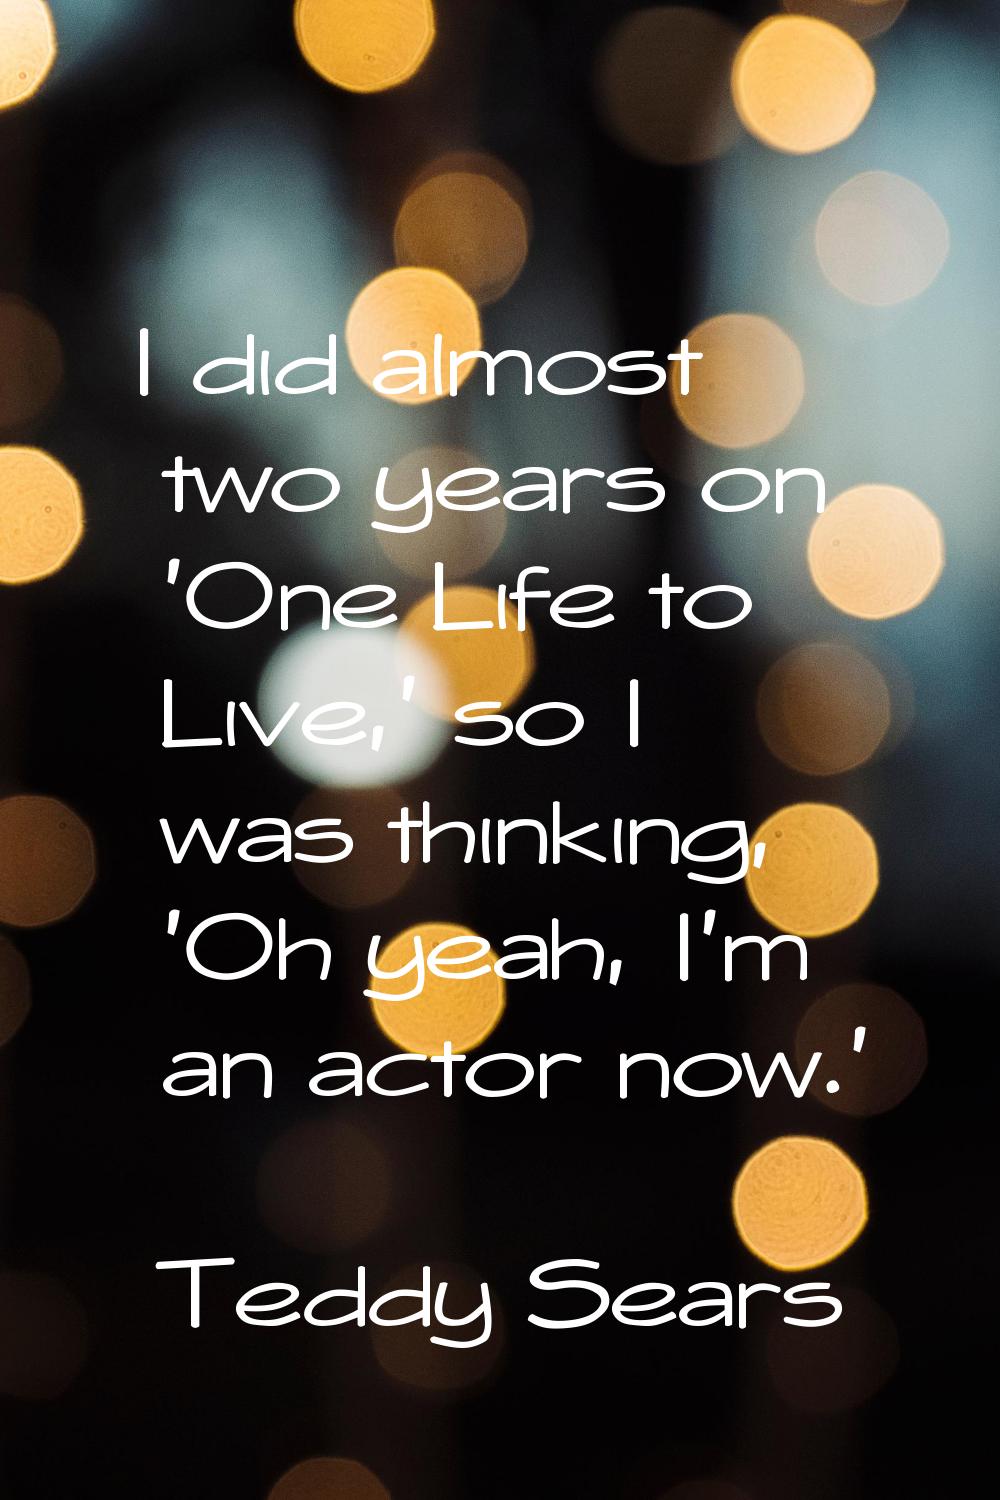 I did almost two years on 'One Life to Live,' so I was thinking, 'Oh yeah, I'm an actor now.'